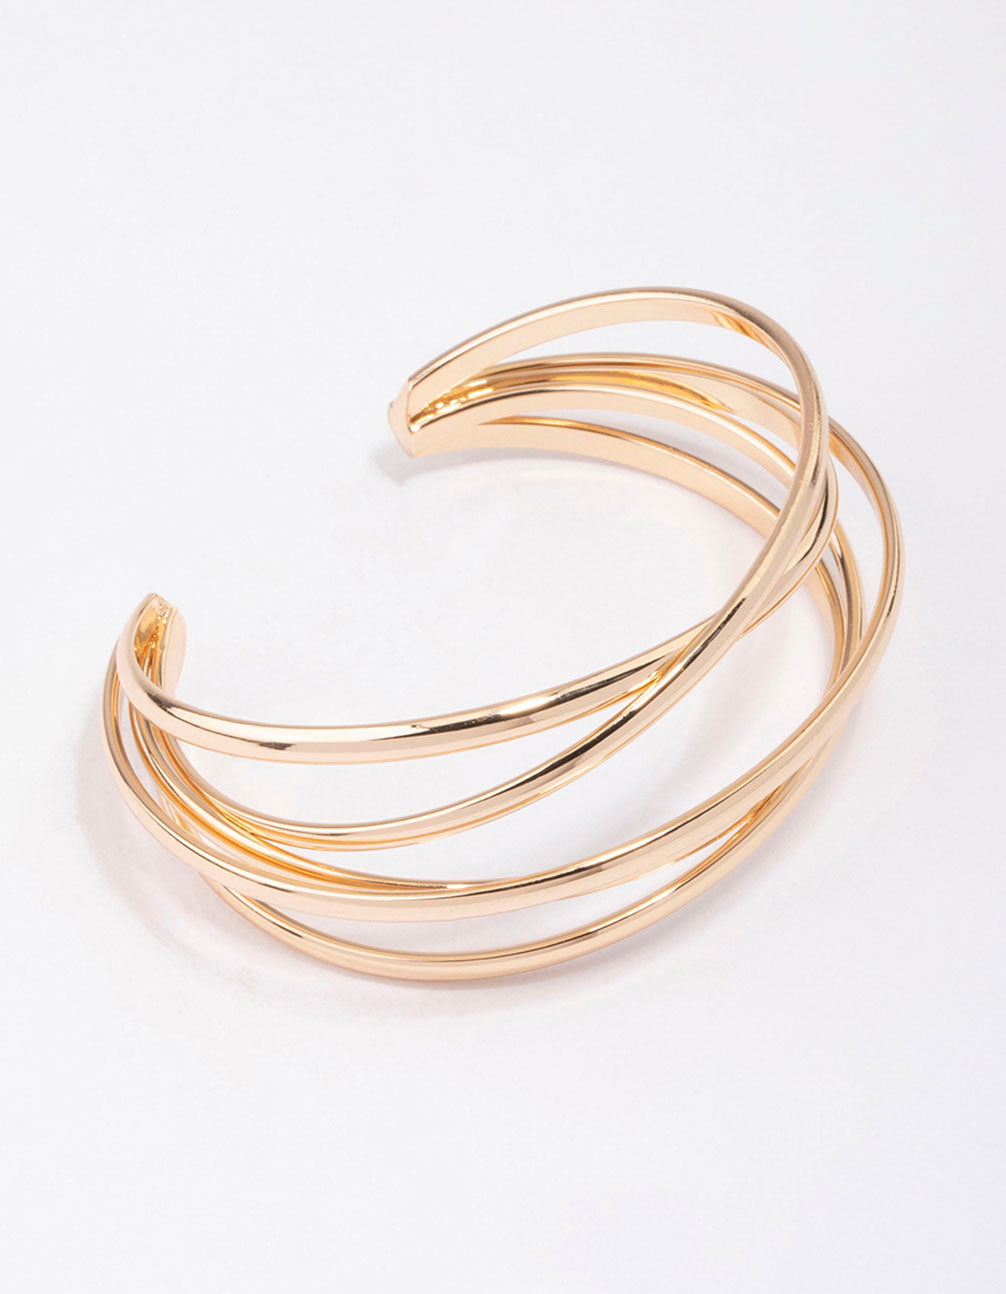 Suki Gold Cuff Bracelet - Sapphire by Arms Of Eve Online | THE ICONIC |  Australia